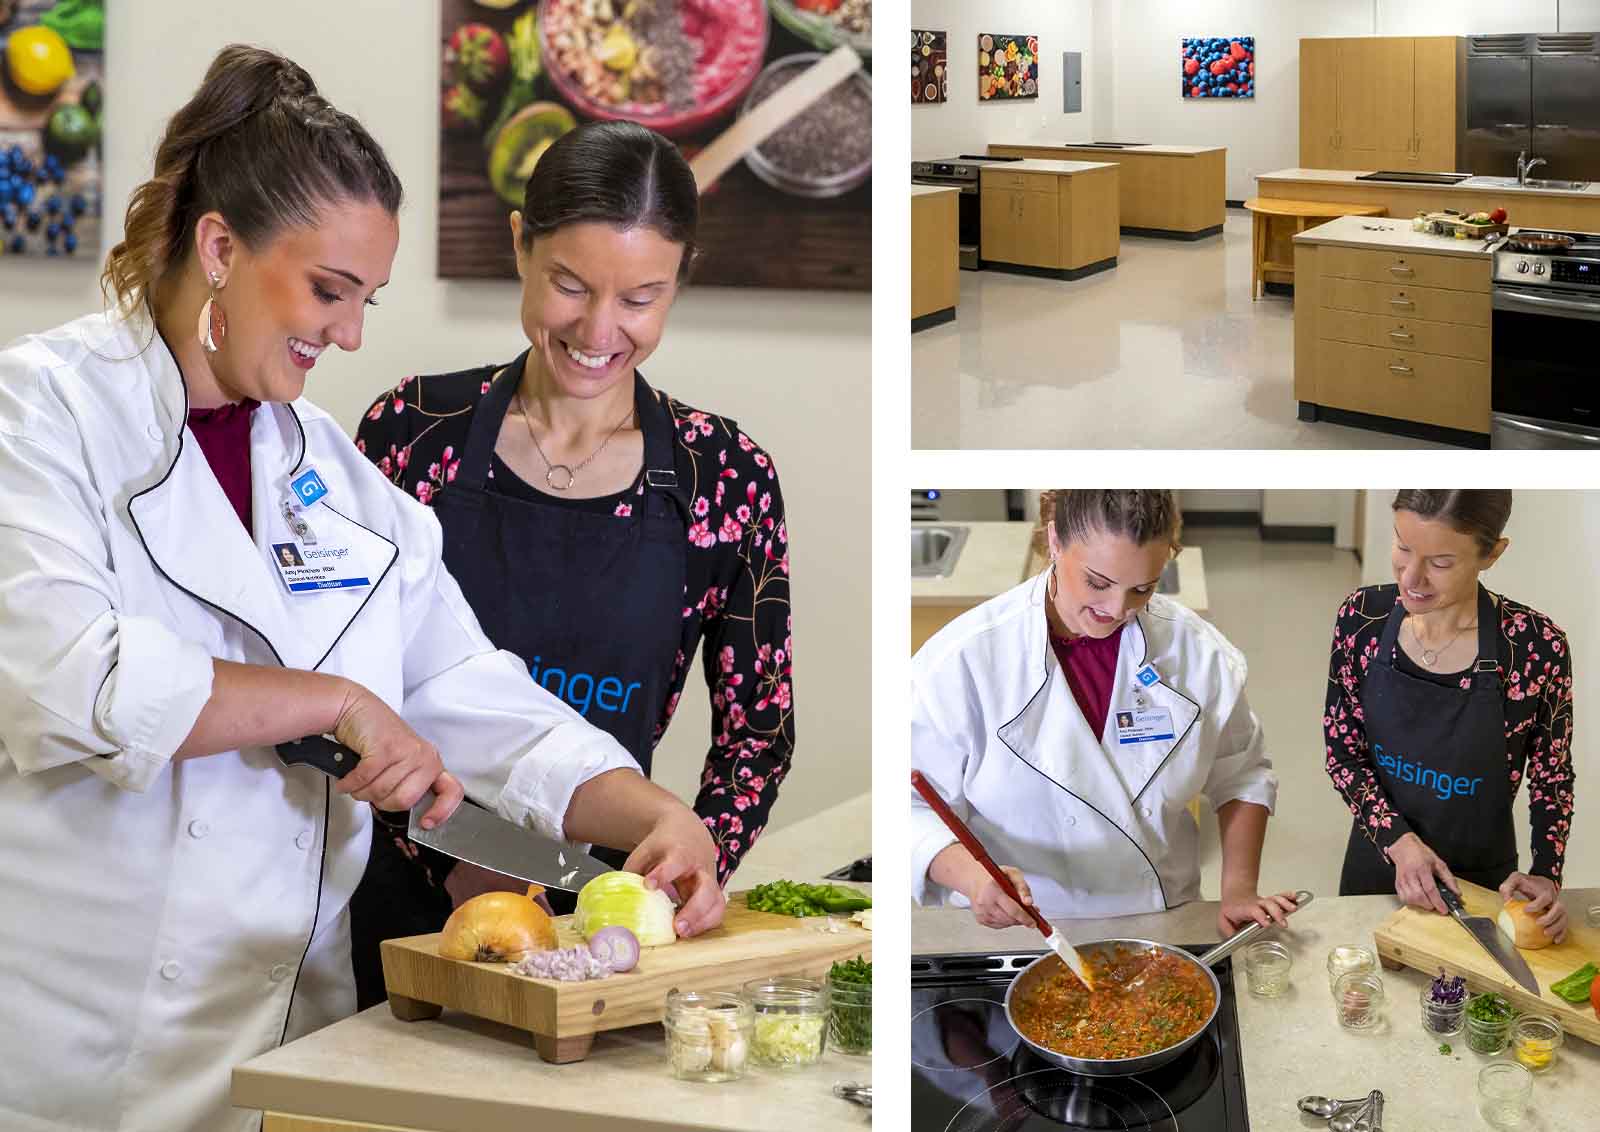 Geisinger’s Culinary Medicine classes in Selinsgrove where students are learning to cook delicious, healthy recipes.